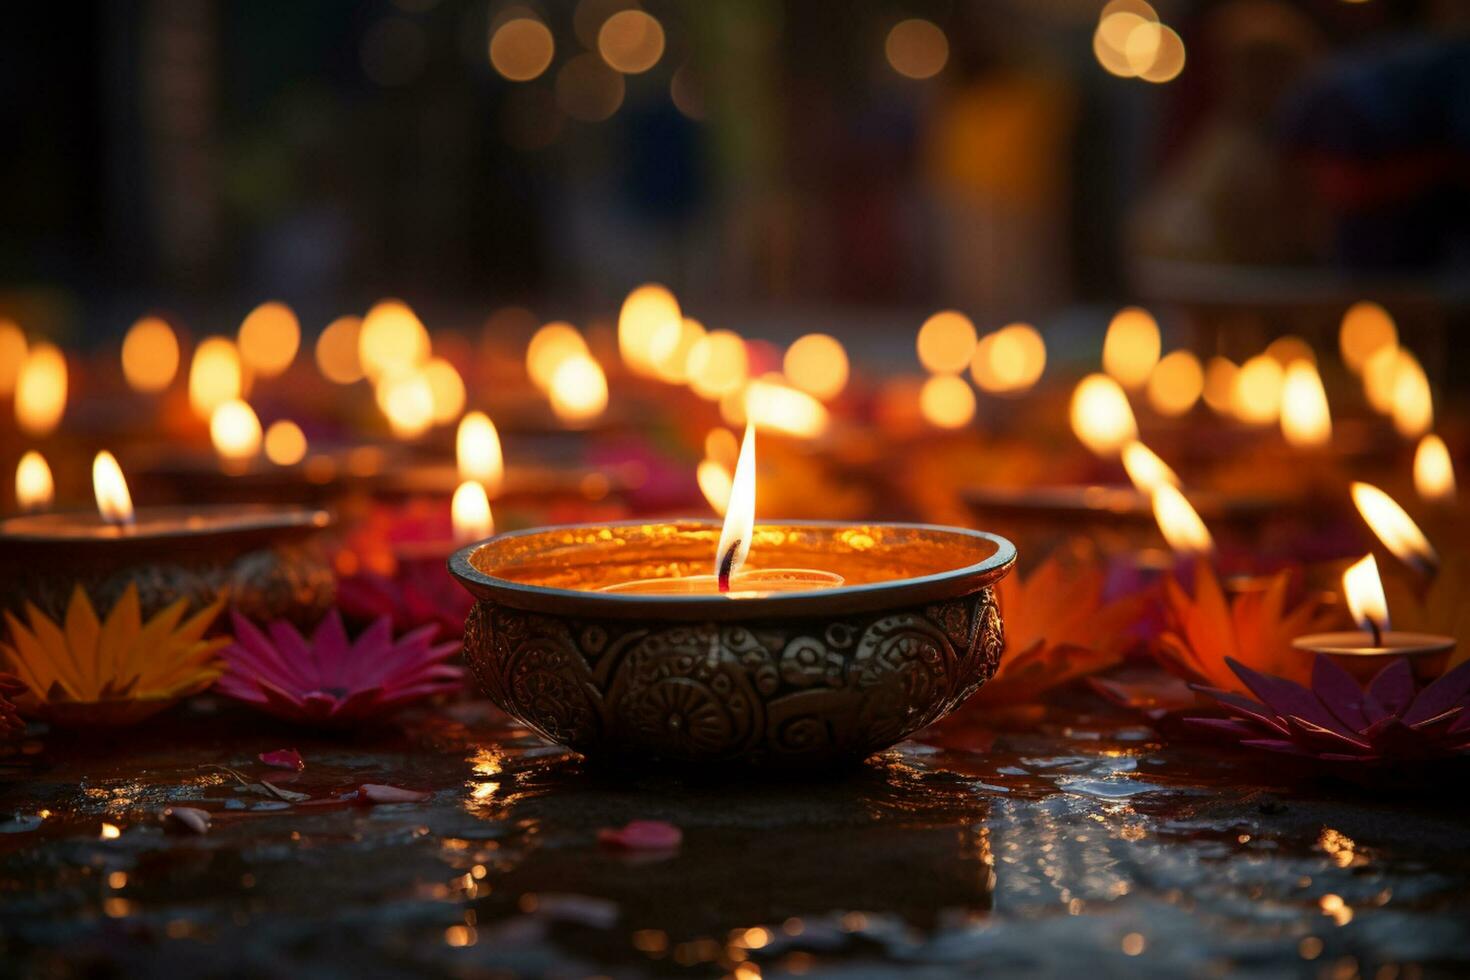 candlelight at diwali festival indian traditional festival photo